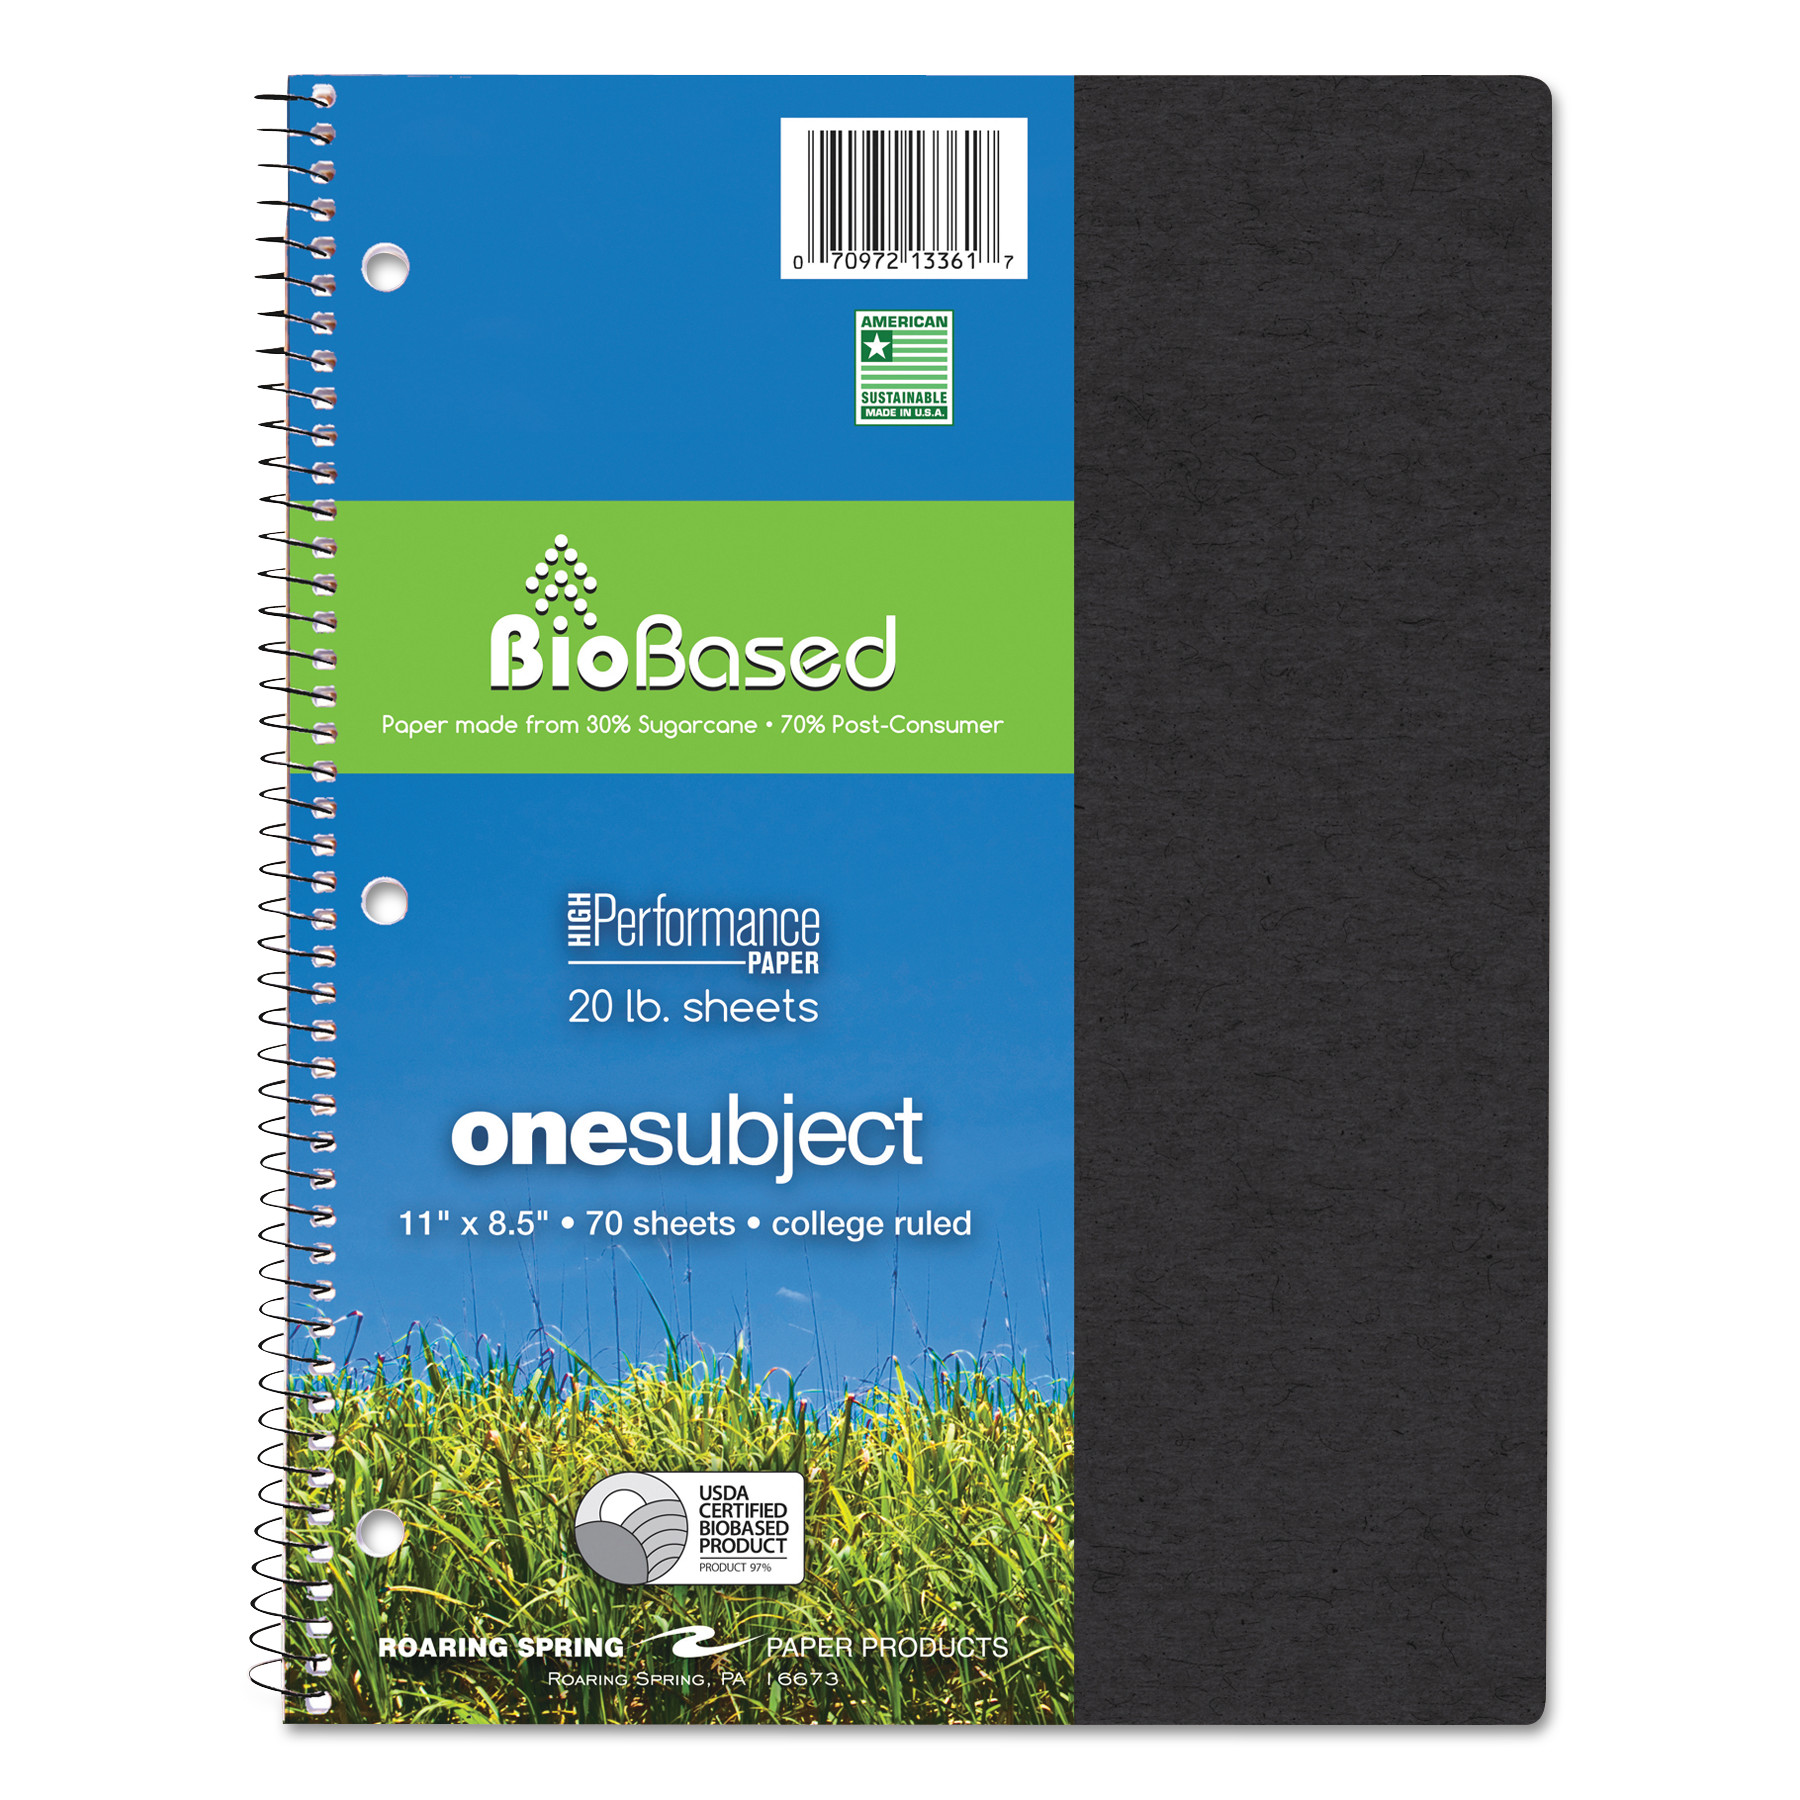  Roaring Spring 13361 Environotes BioBased Notebook, 1 Subject, Medium/College Rule, Assorted Earthtones Covers, 11 x 8.5, 70 Sheets (ROA13361) 